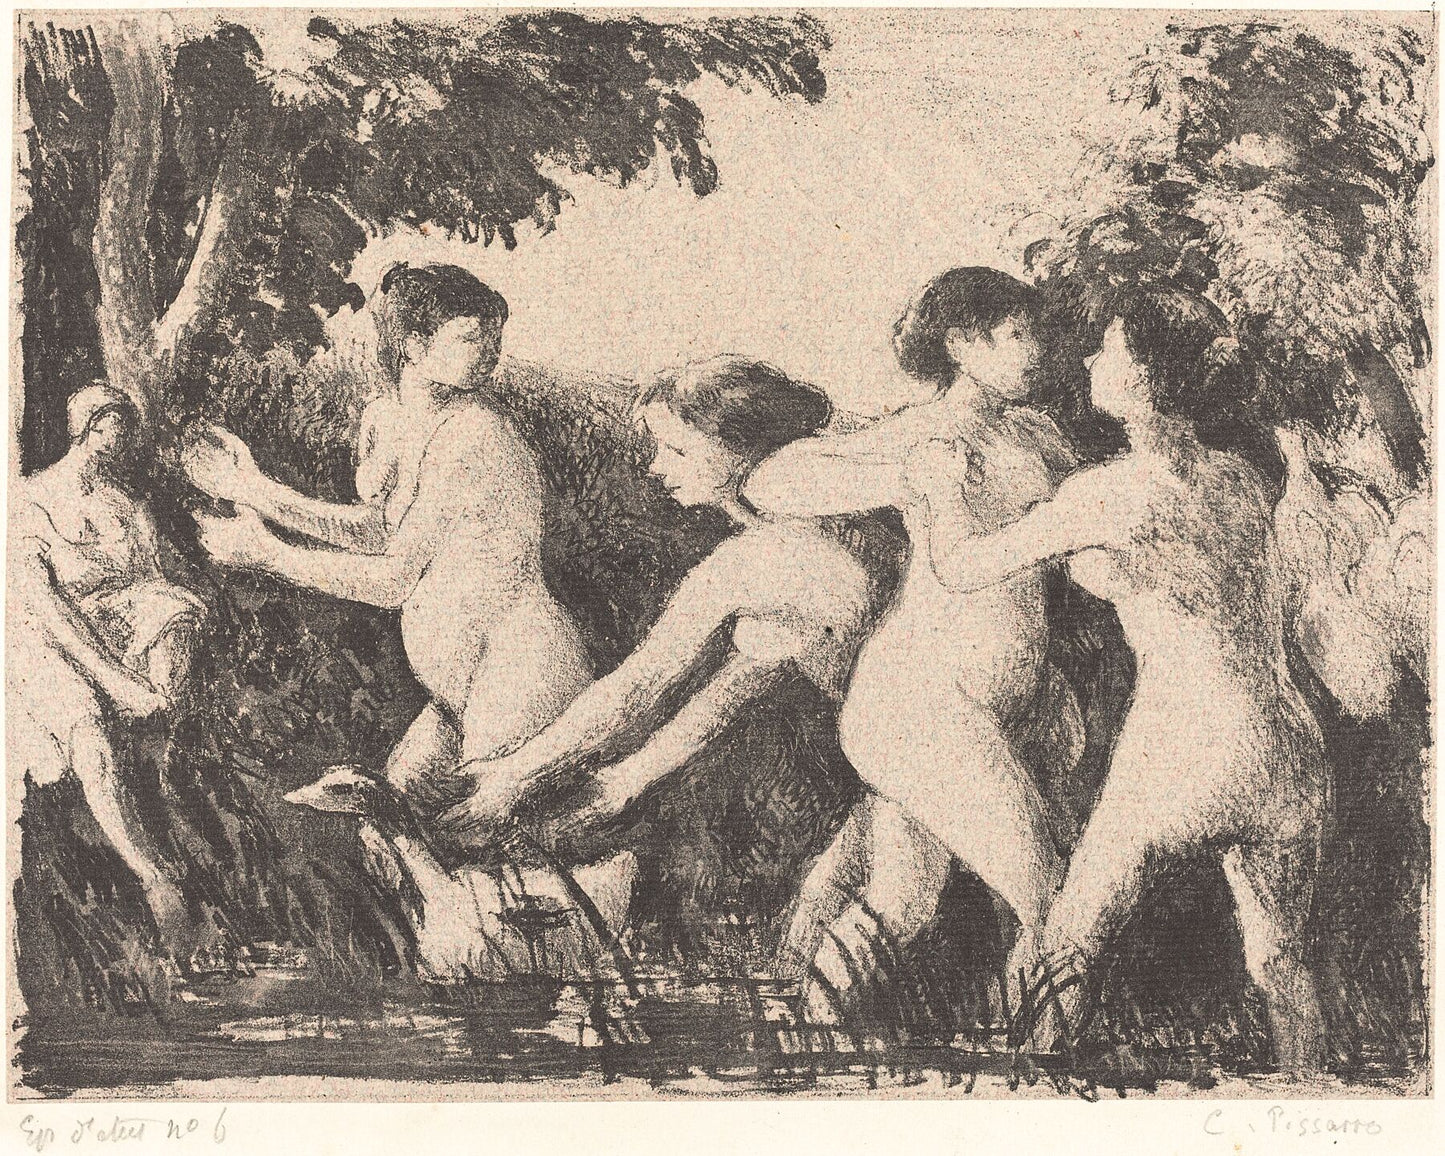 Baigneuses Luttant (Bathers Wrestling) by Camille Pissarro - c. 1896